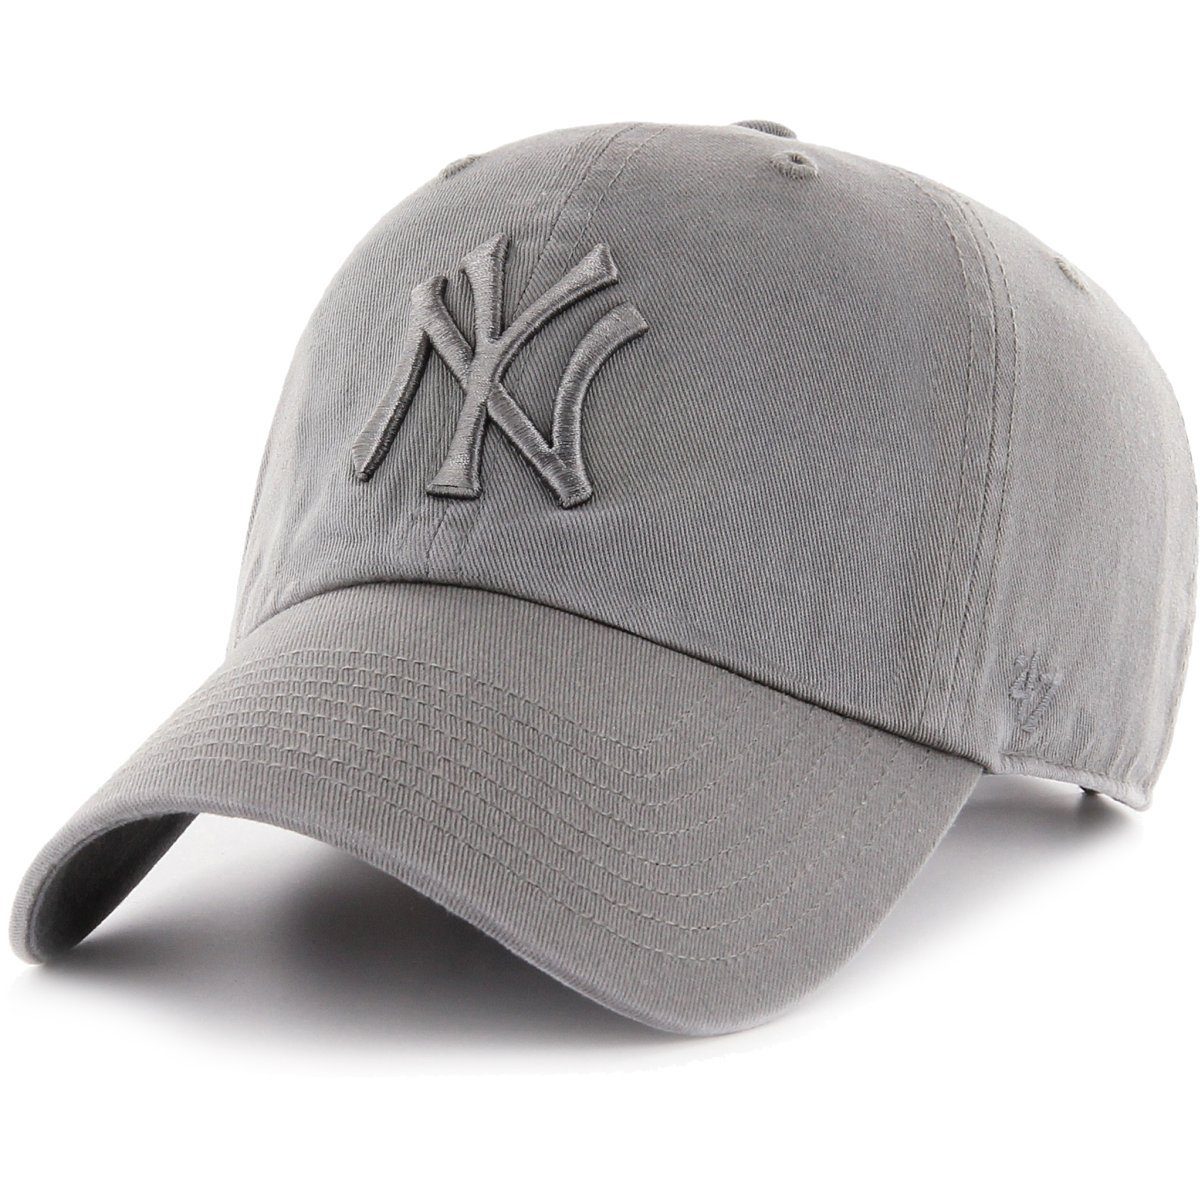 Baseball Cap New Fit CLEAN UP Brand York Yankees Relaxed '47